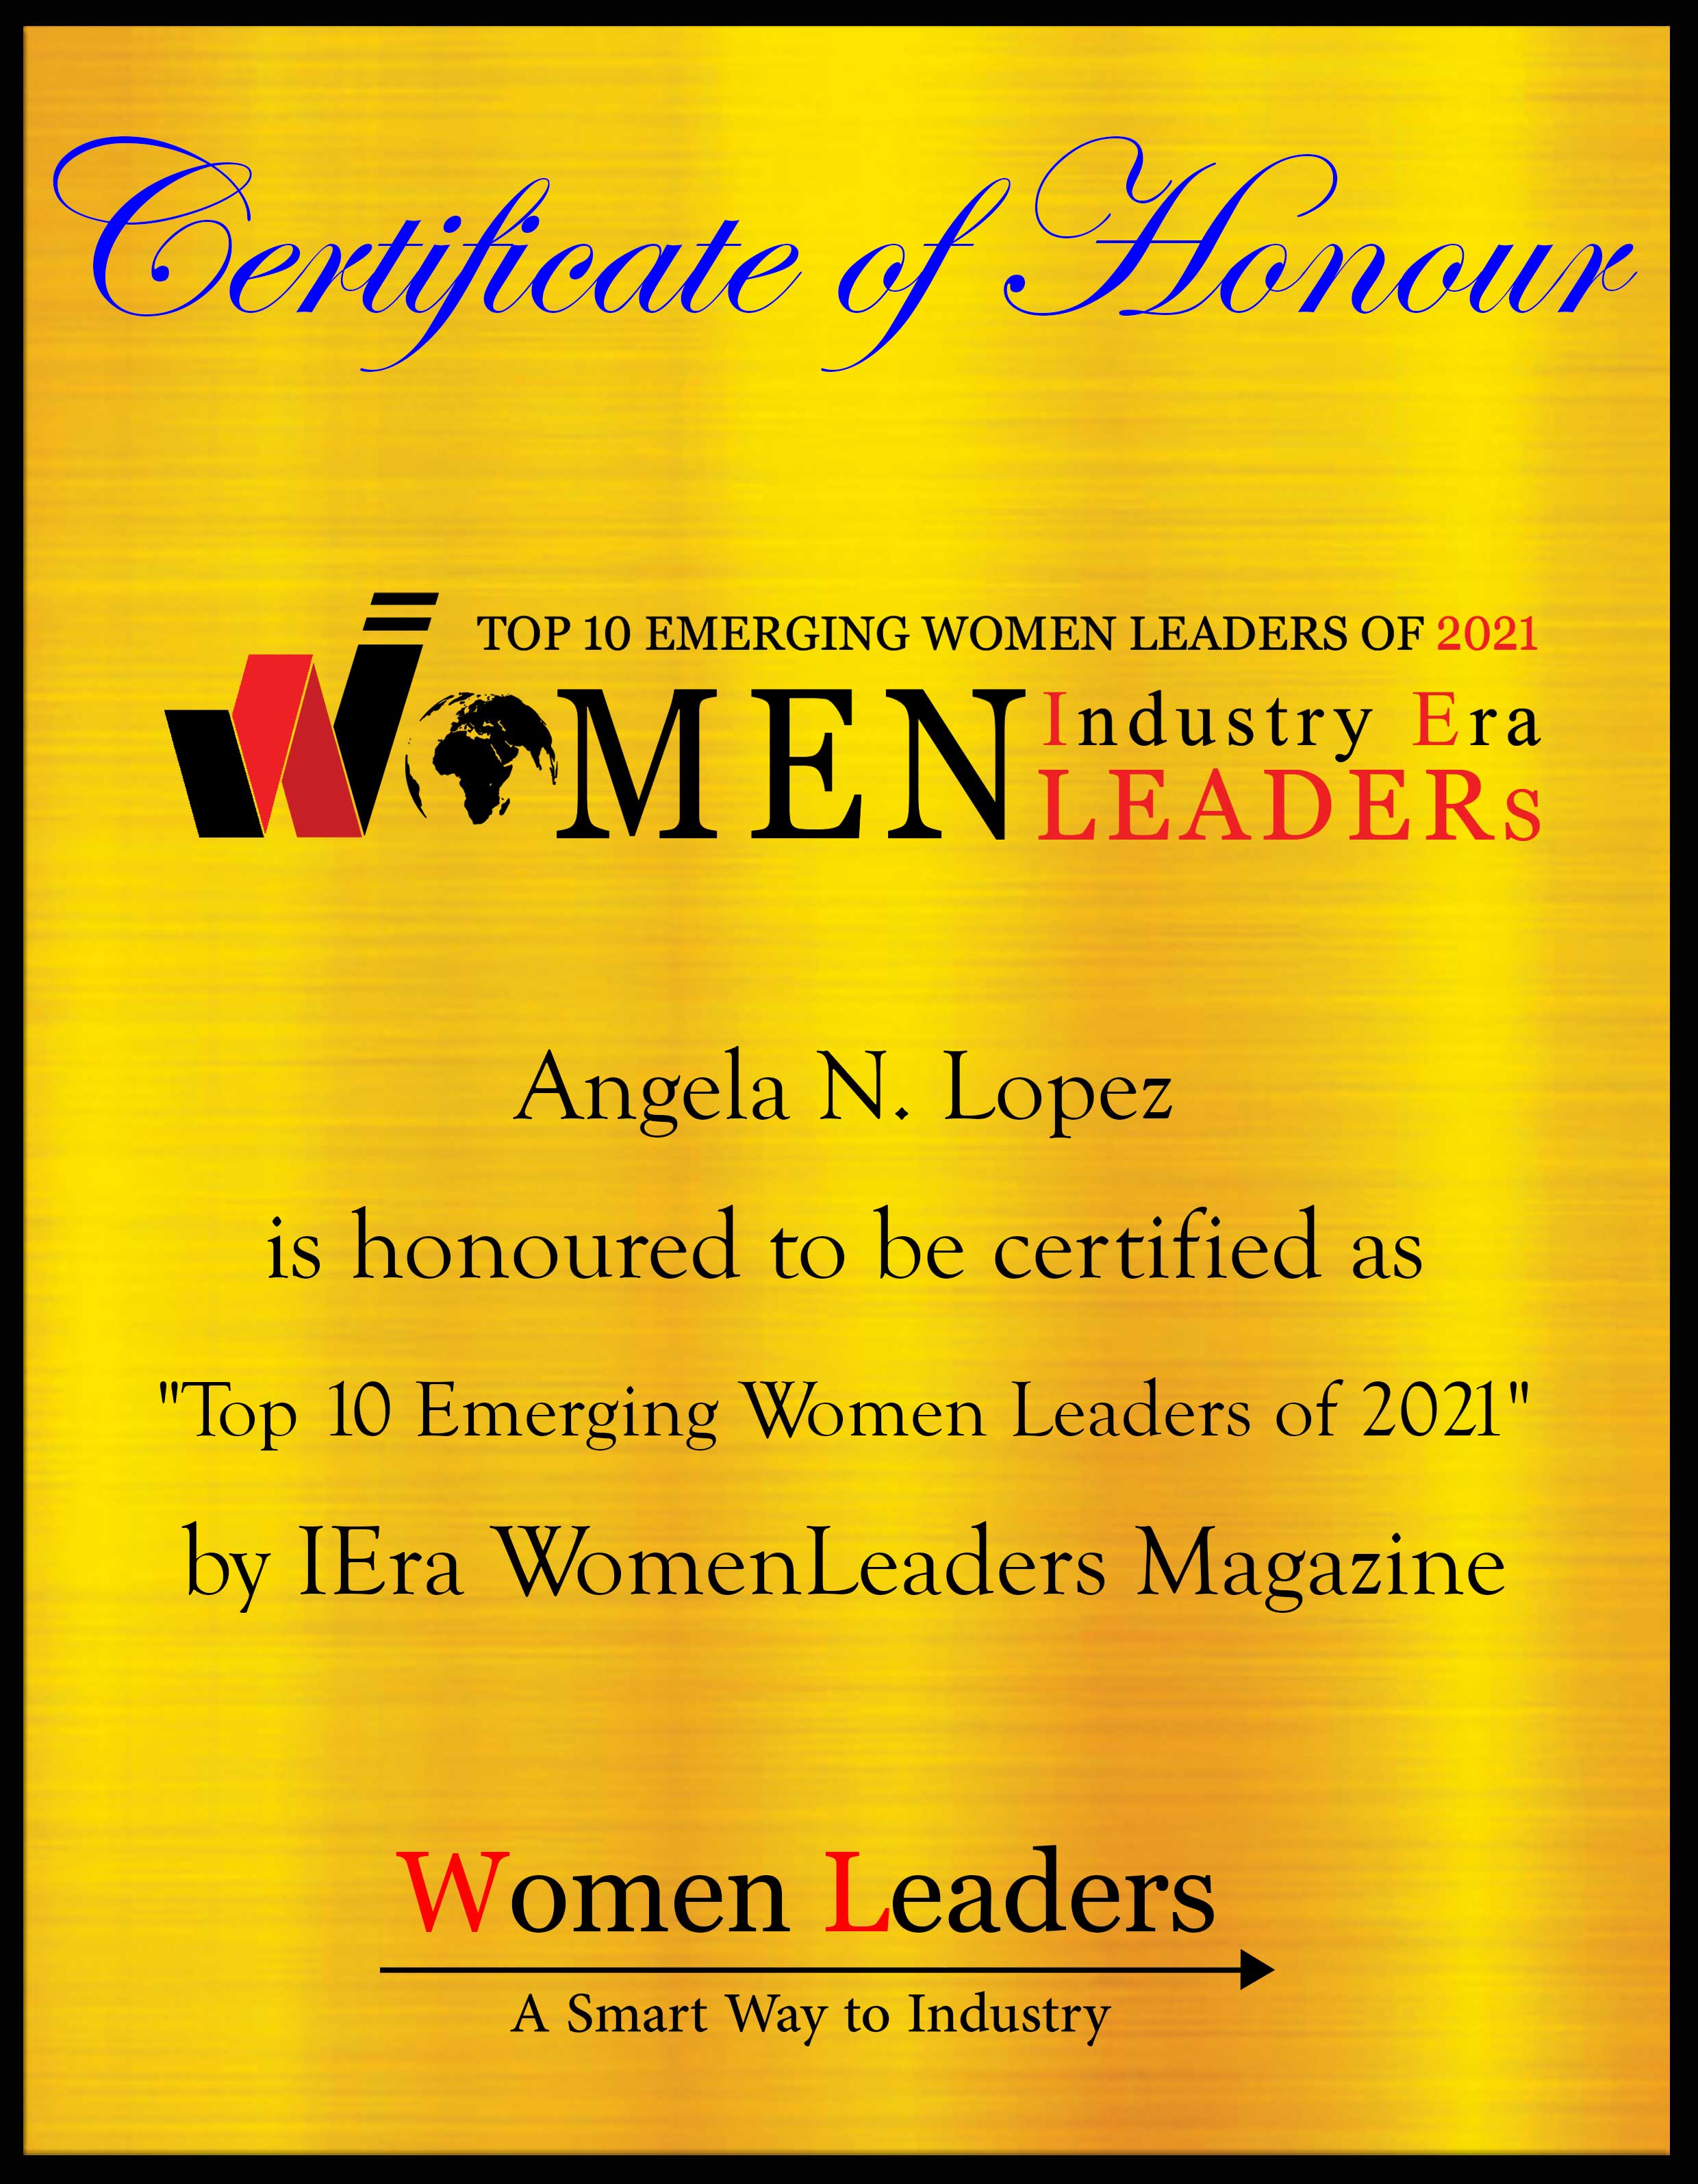 Angela N. Lopez, Vice President for Product & Innovation Strateg of JPMorgan Chase & Co., Most Empowering Women Leaders of 2021